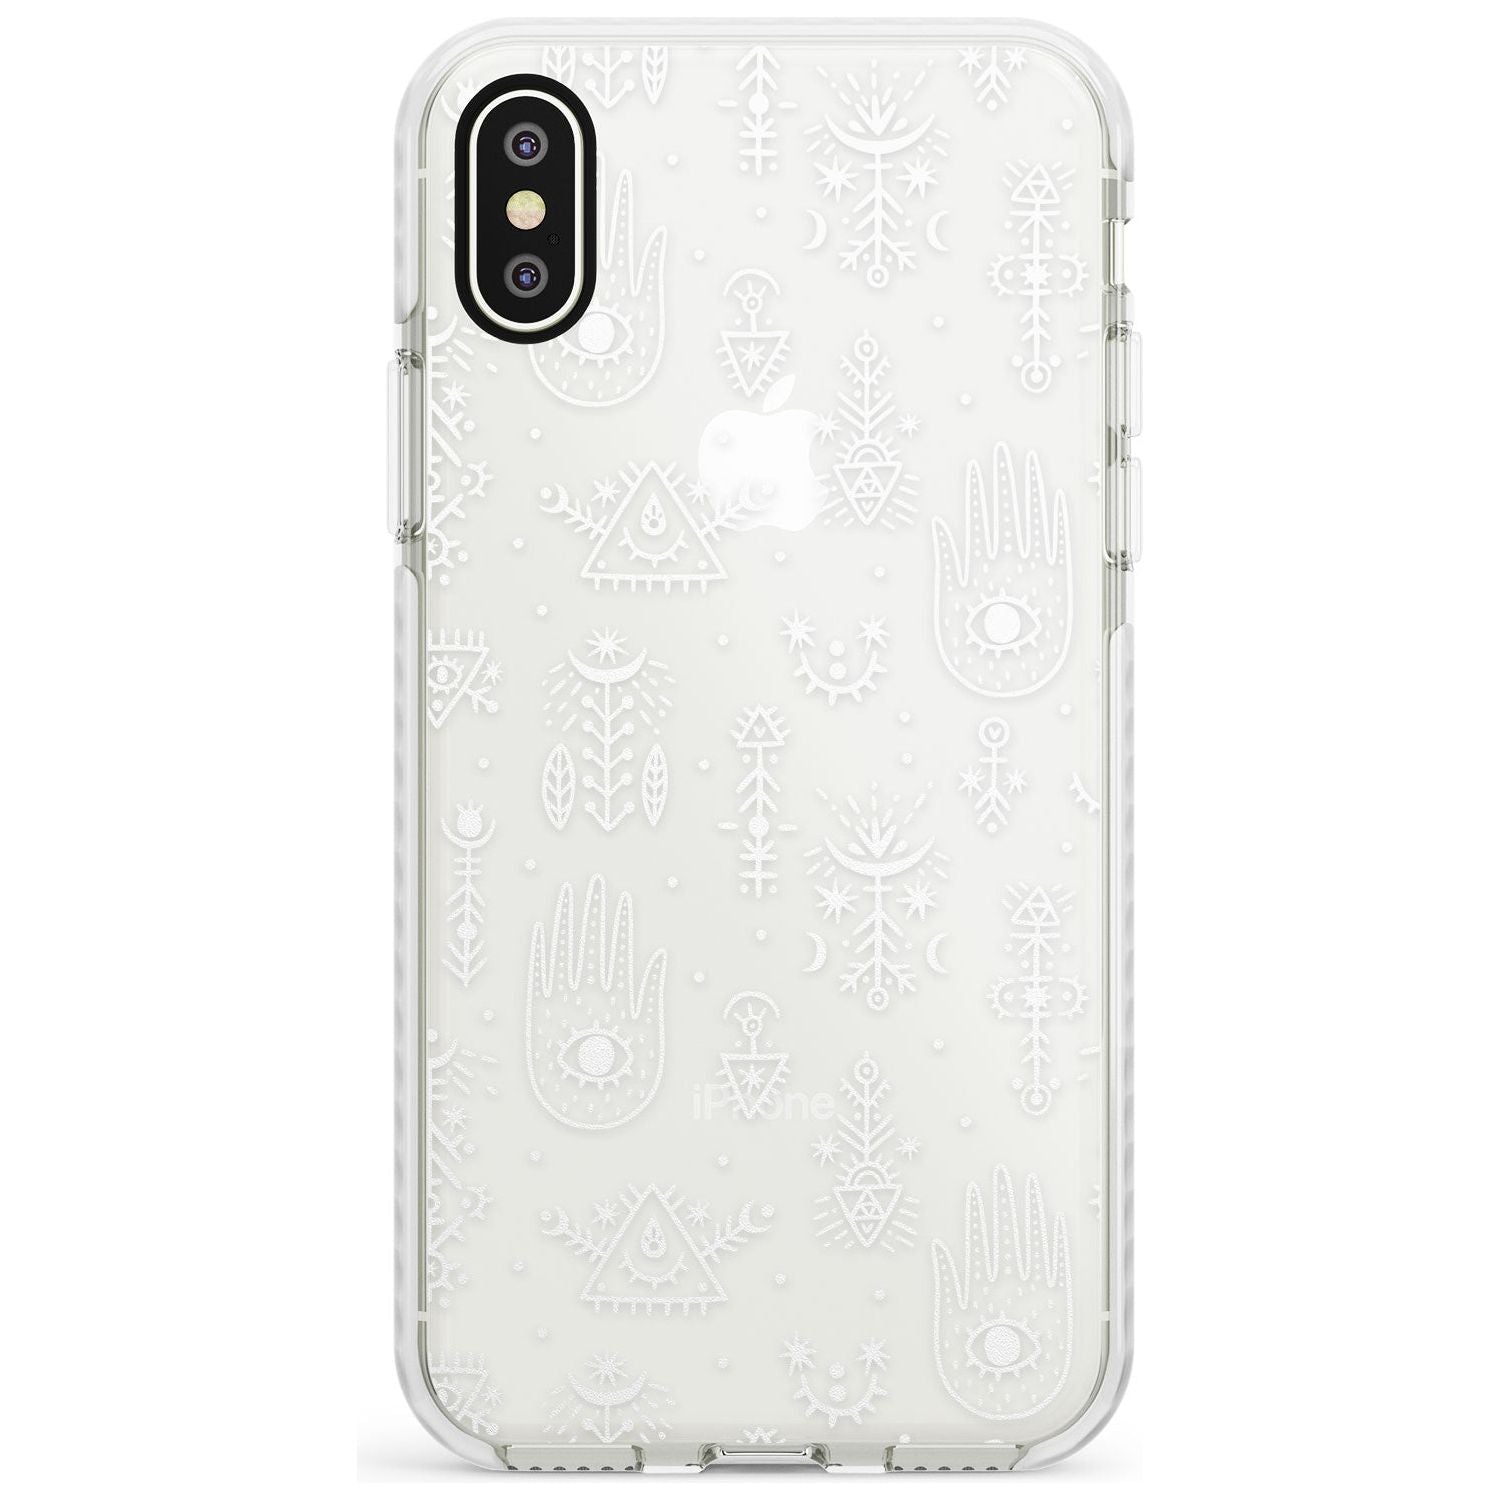 Black Tribal Palms Impact Phone Case for iPhone X XS Max XR